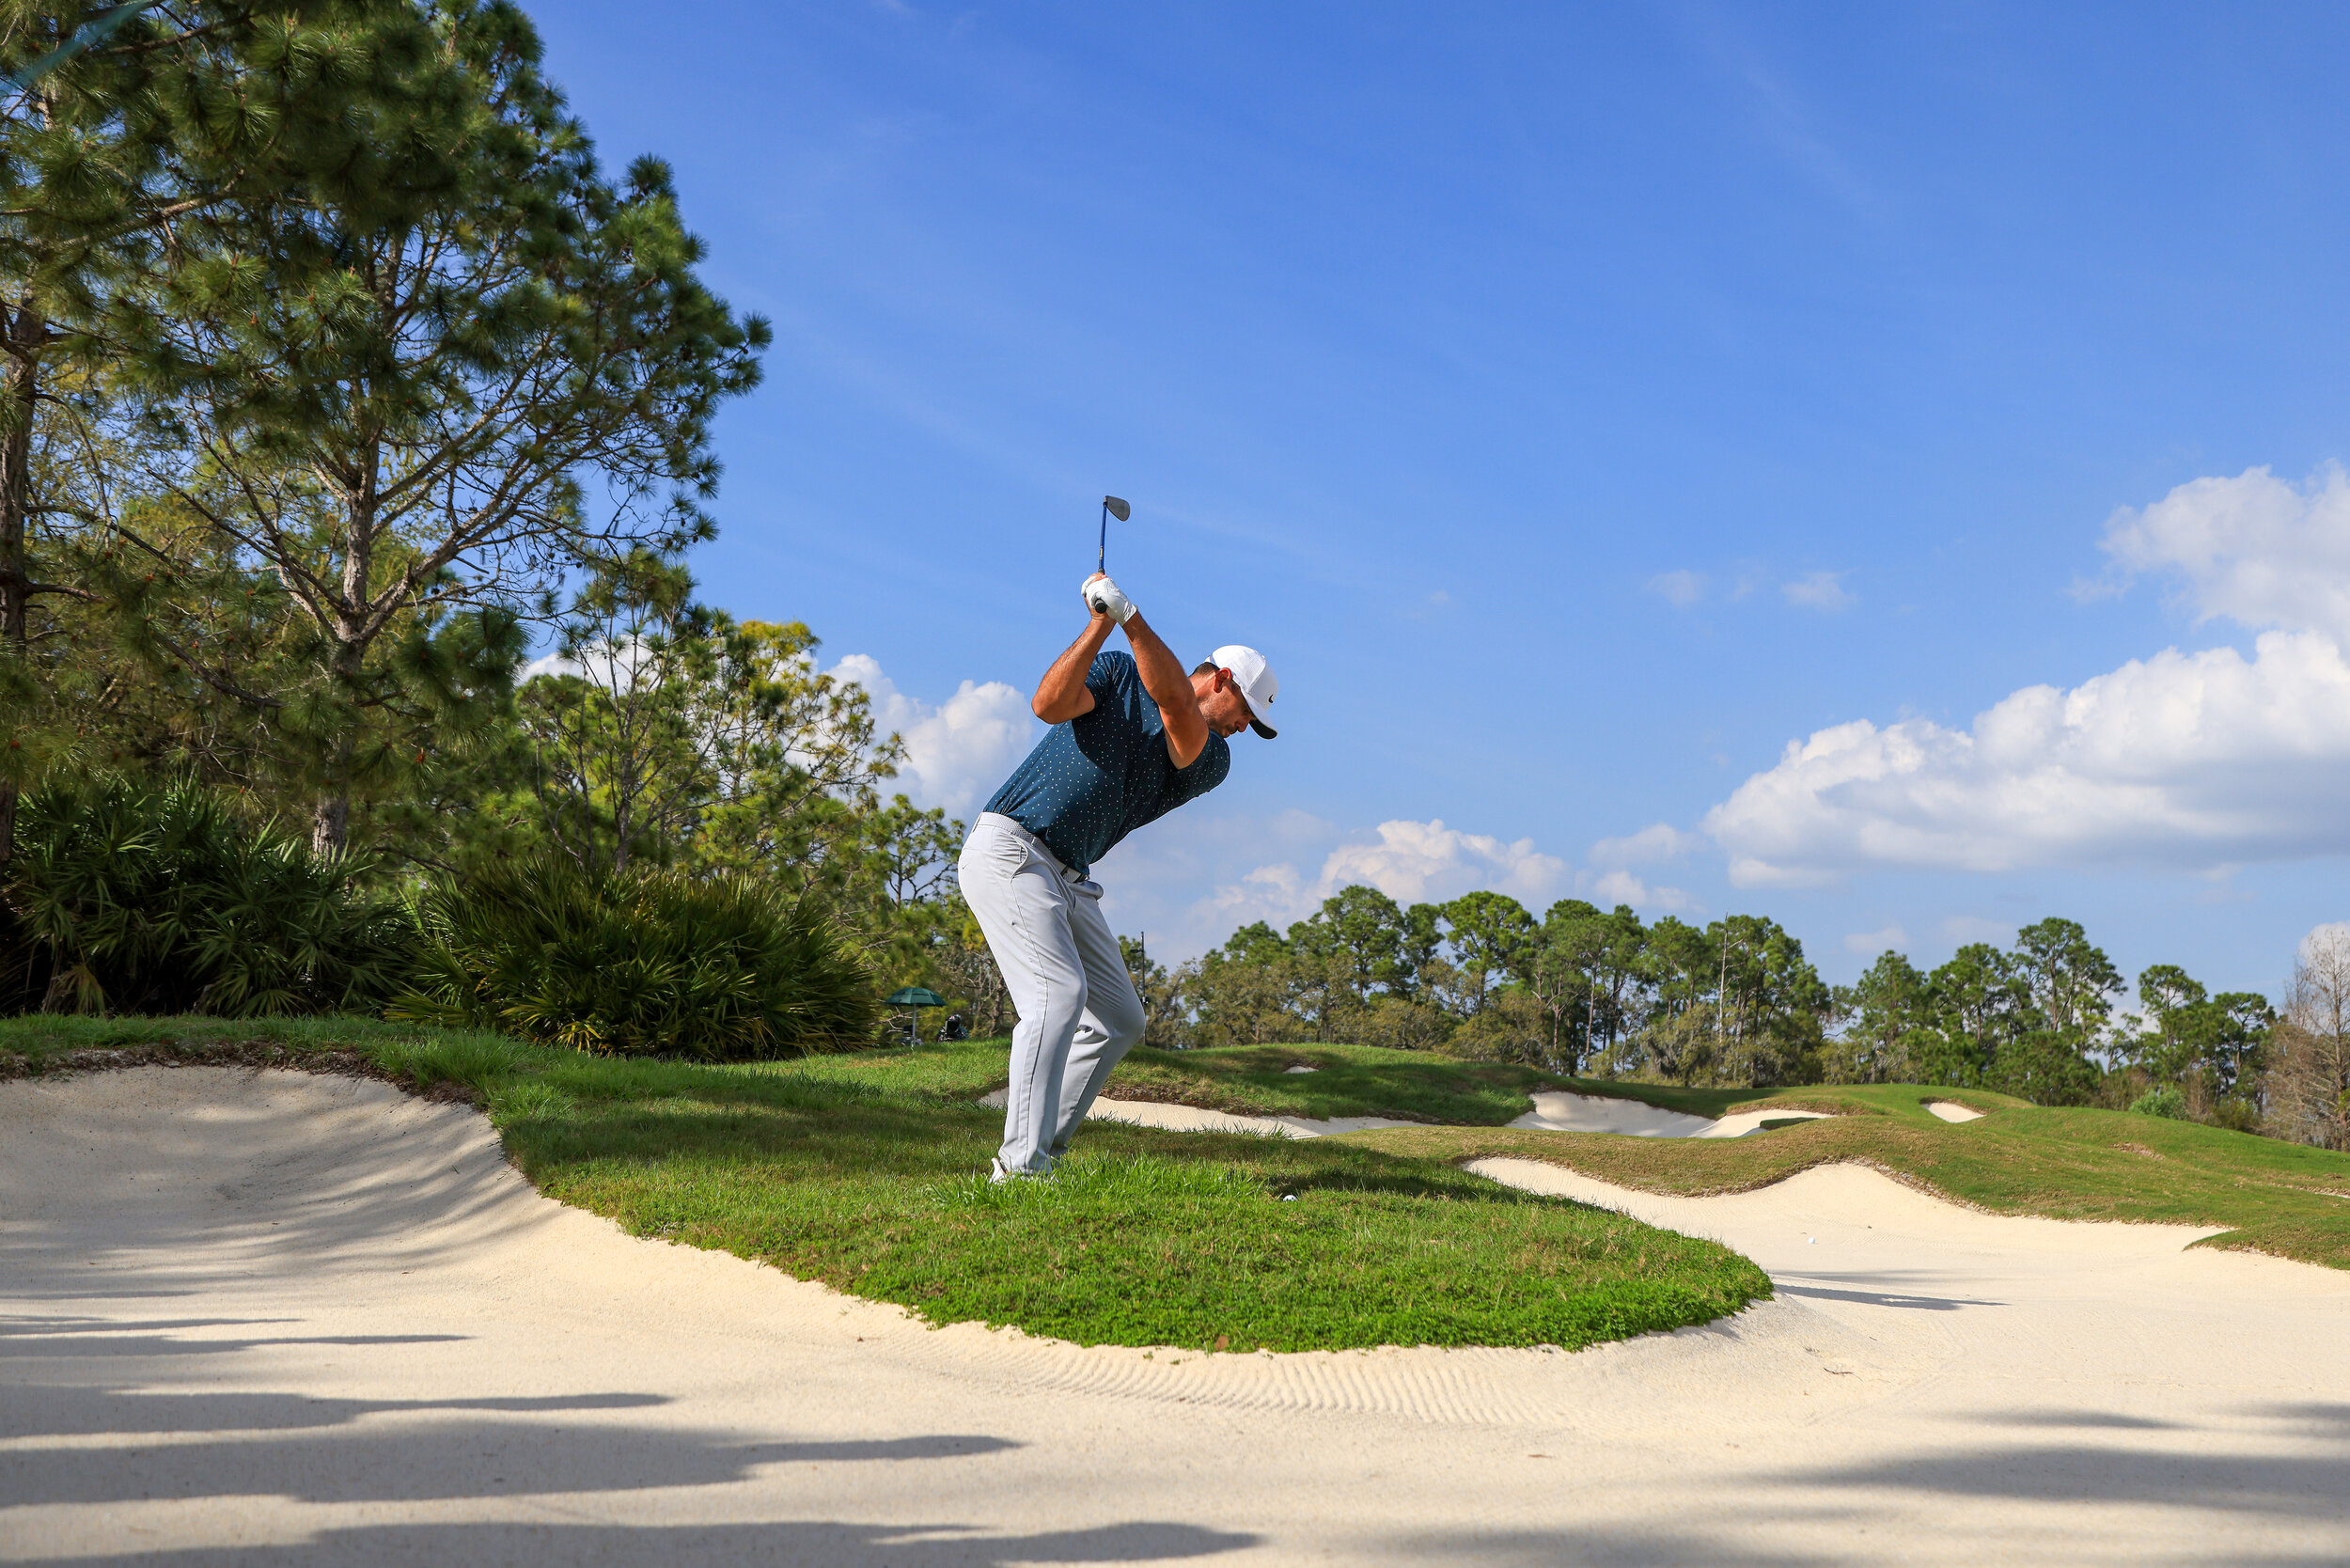  BRADENTON, FLORIDA - FEBRUARY 28: Brooks Koepka of the United States plays a second shot from a bunker on the tenth hole during the final round of World Golf Championships-Workday Championship at The Concession on February 28, 2021 in Bradenton, Flo